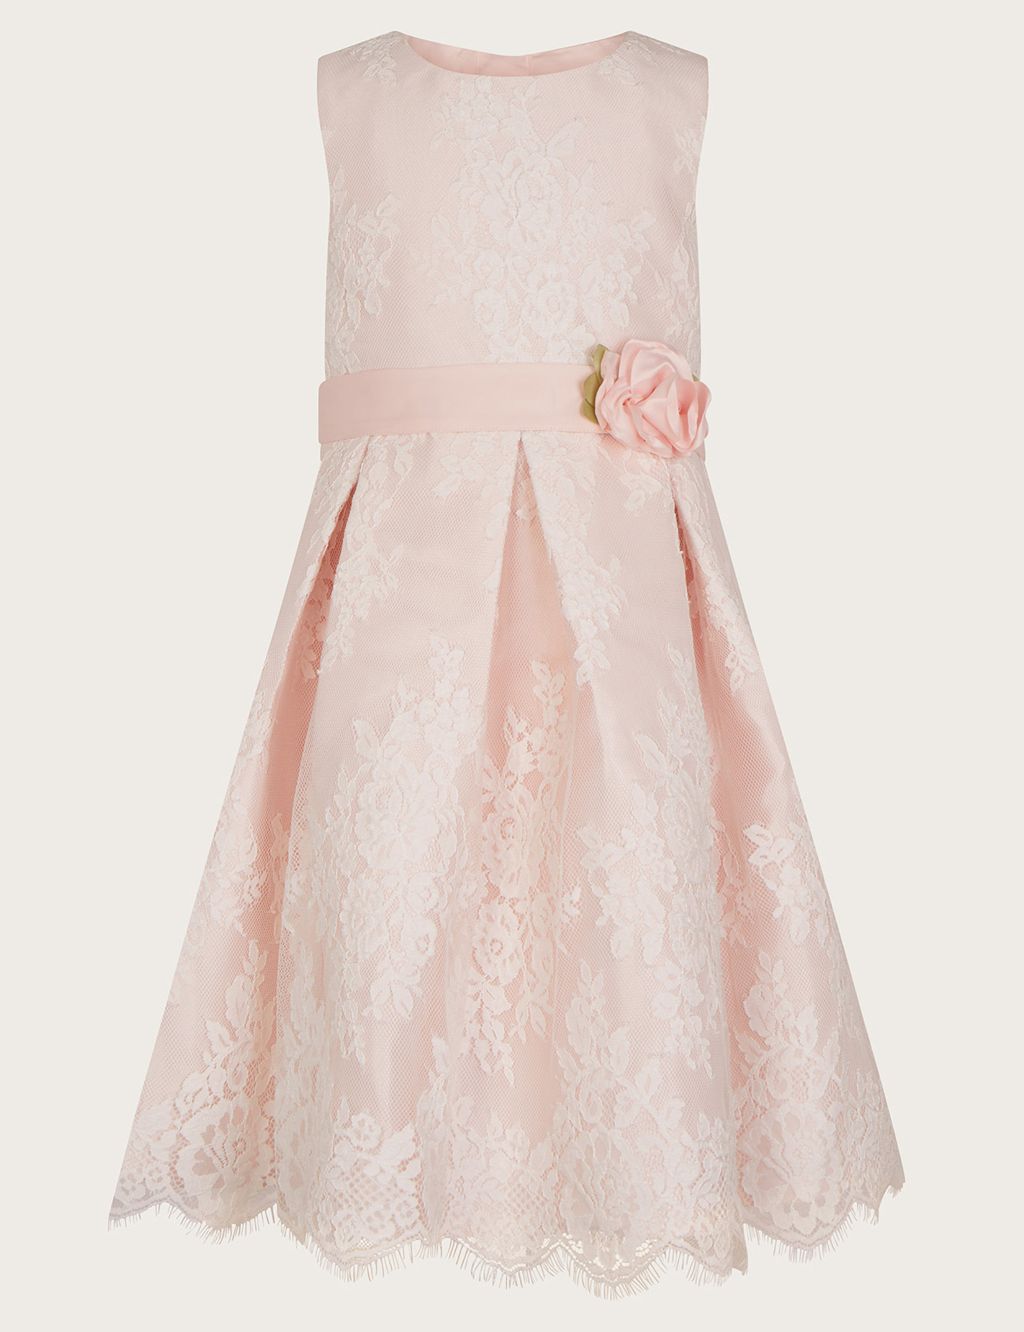 Floral Lace Occasion Dress (3-15 Yrs)